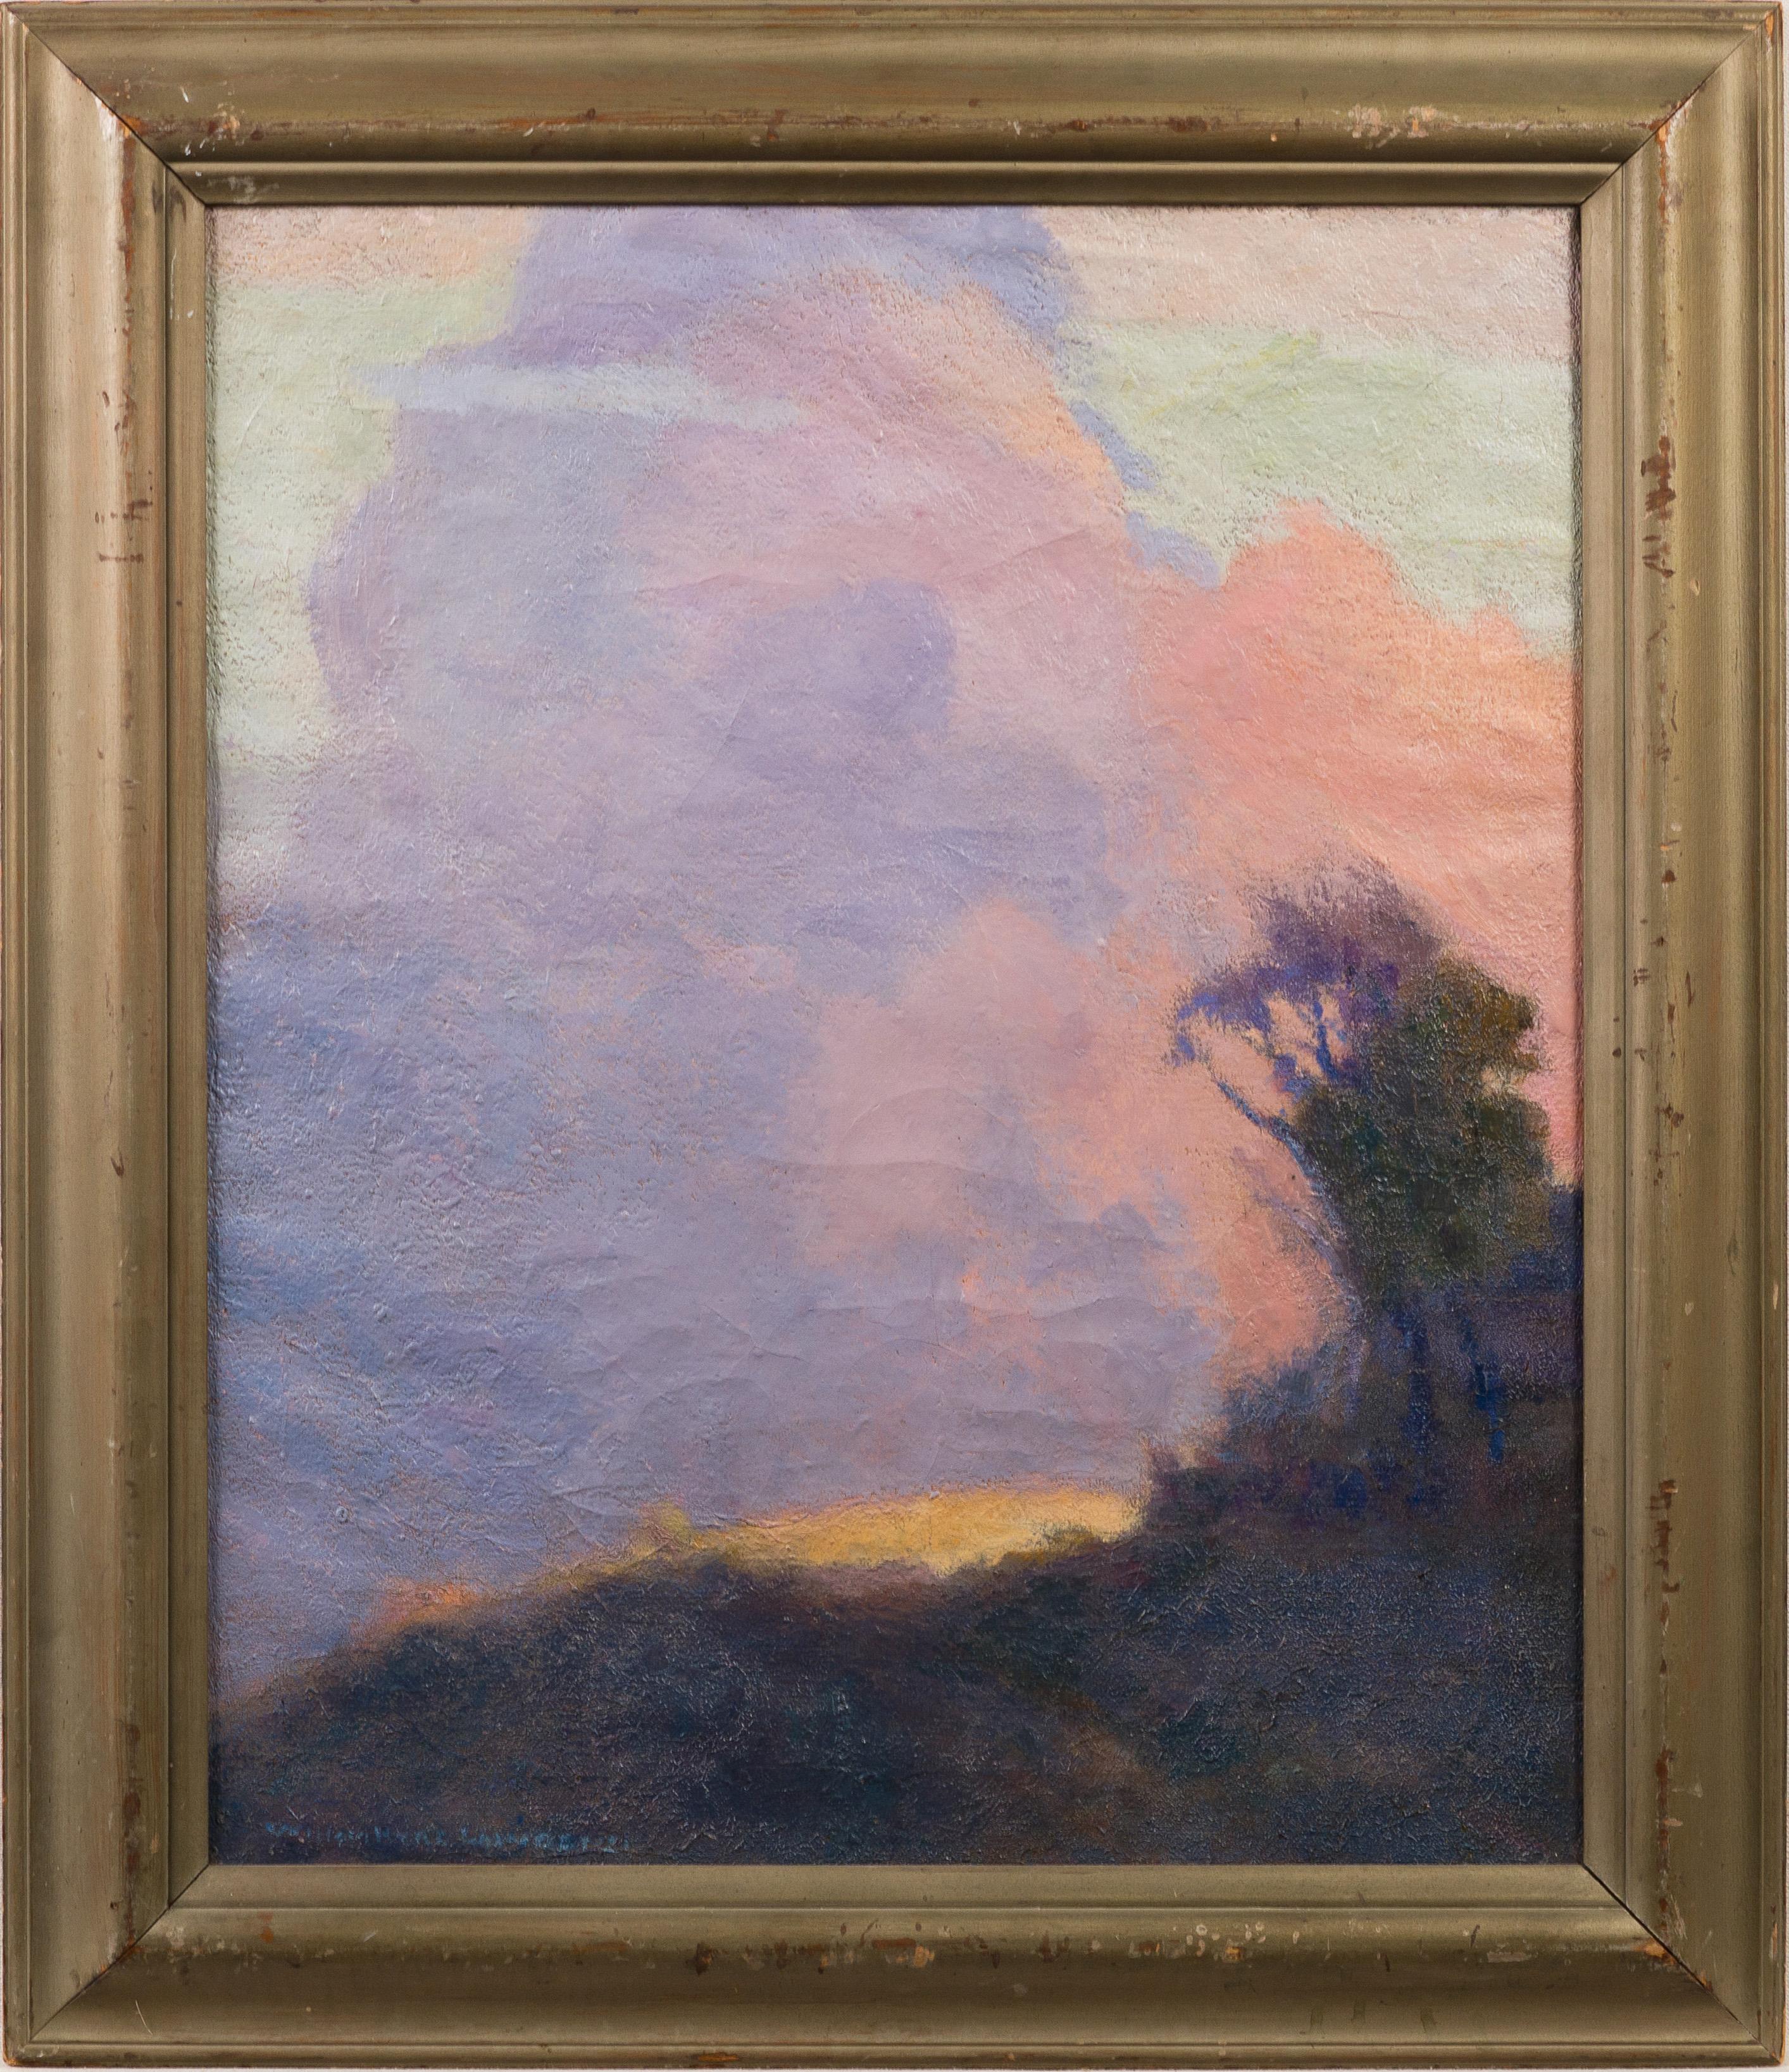 Antique American Impressionist Cloud Study Sunset New Hampshire Landscape Oil - Painting by William Hurd Lawrence 